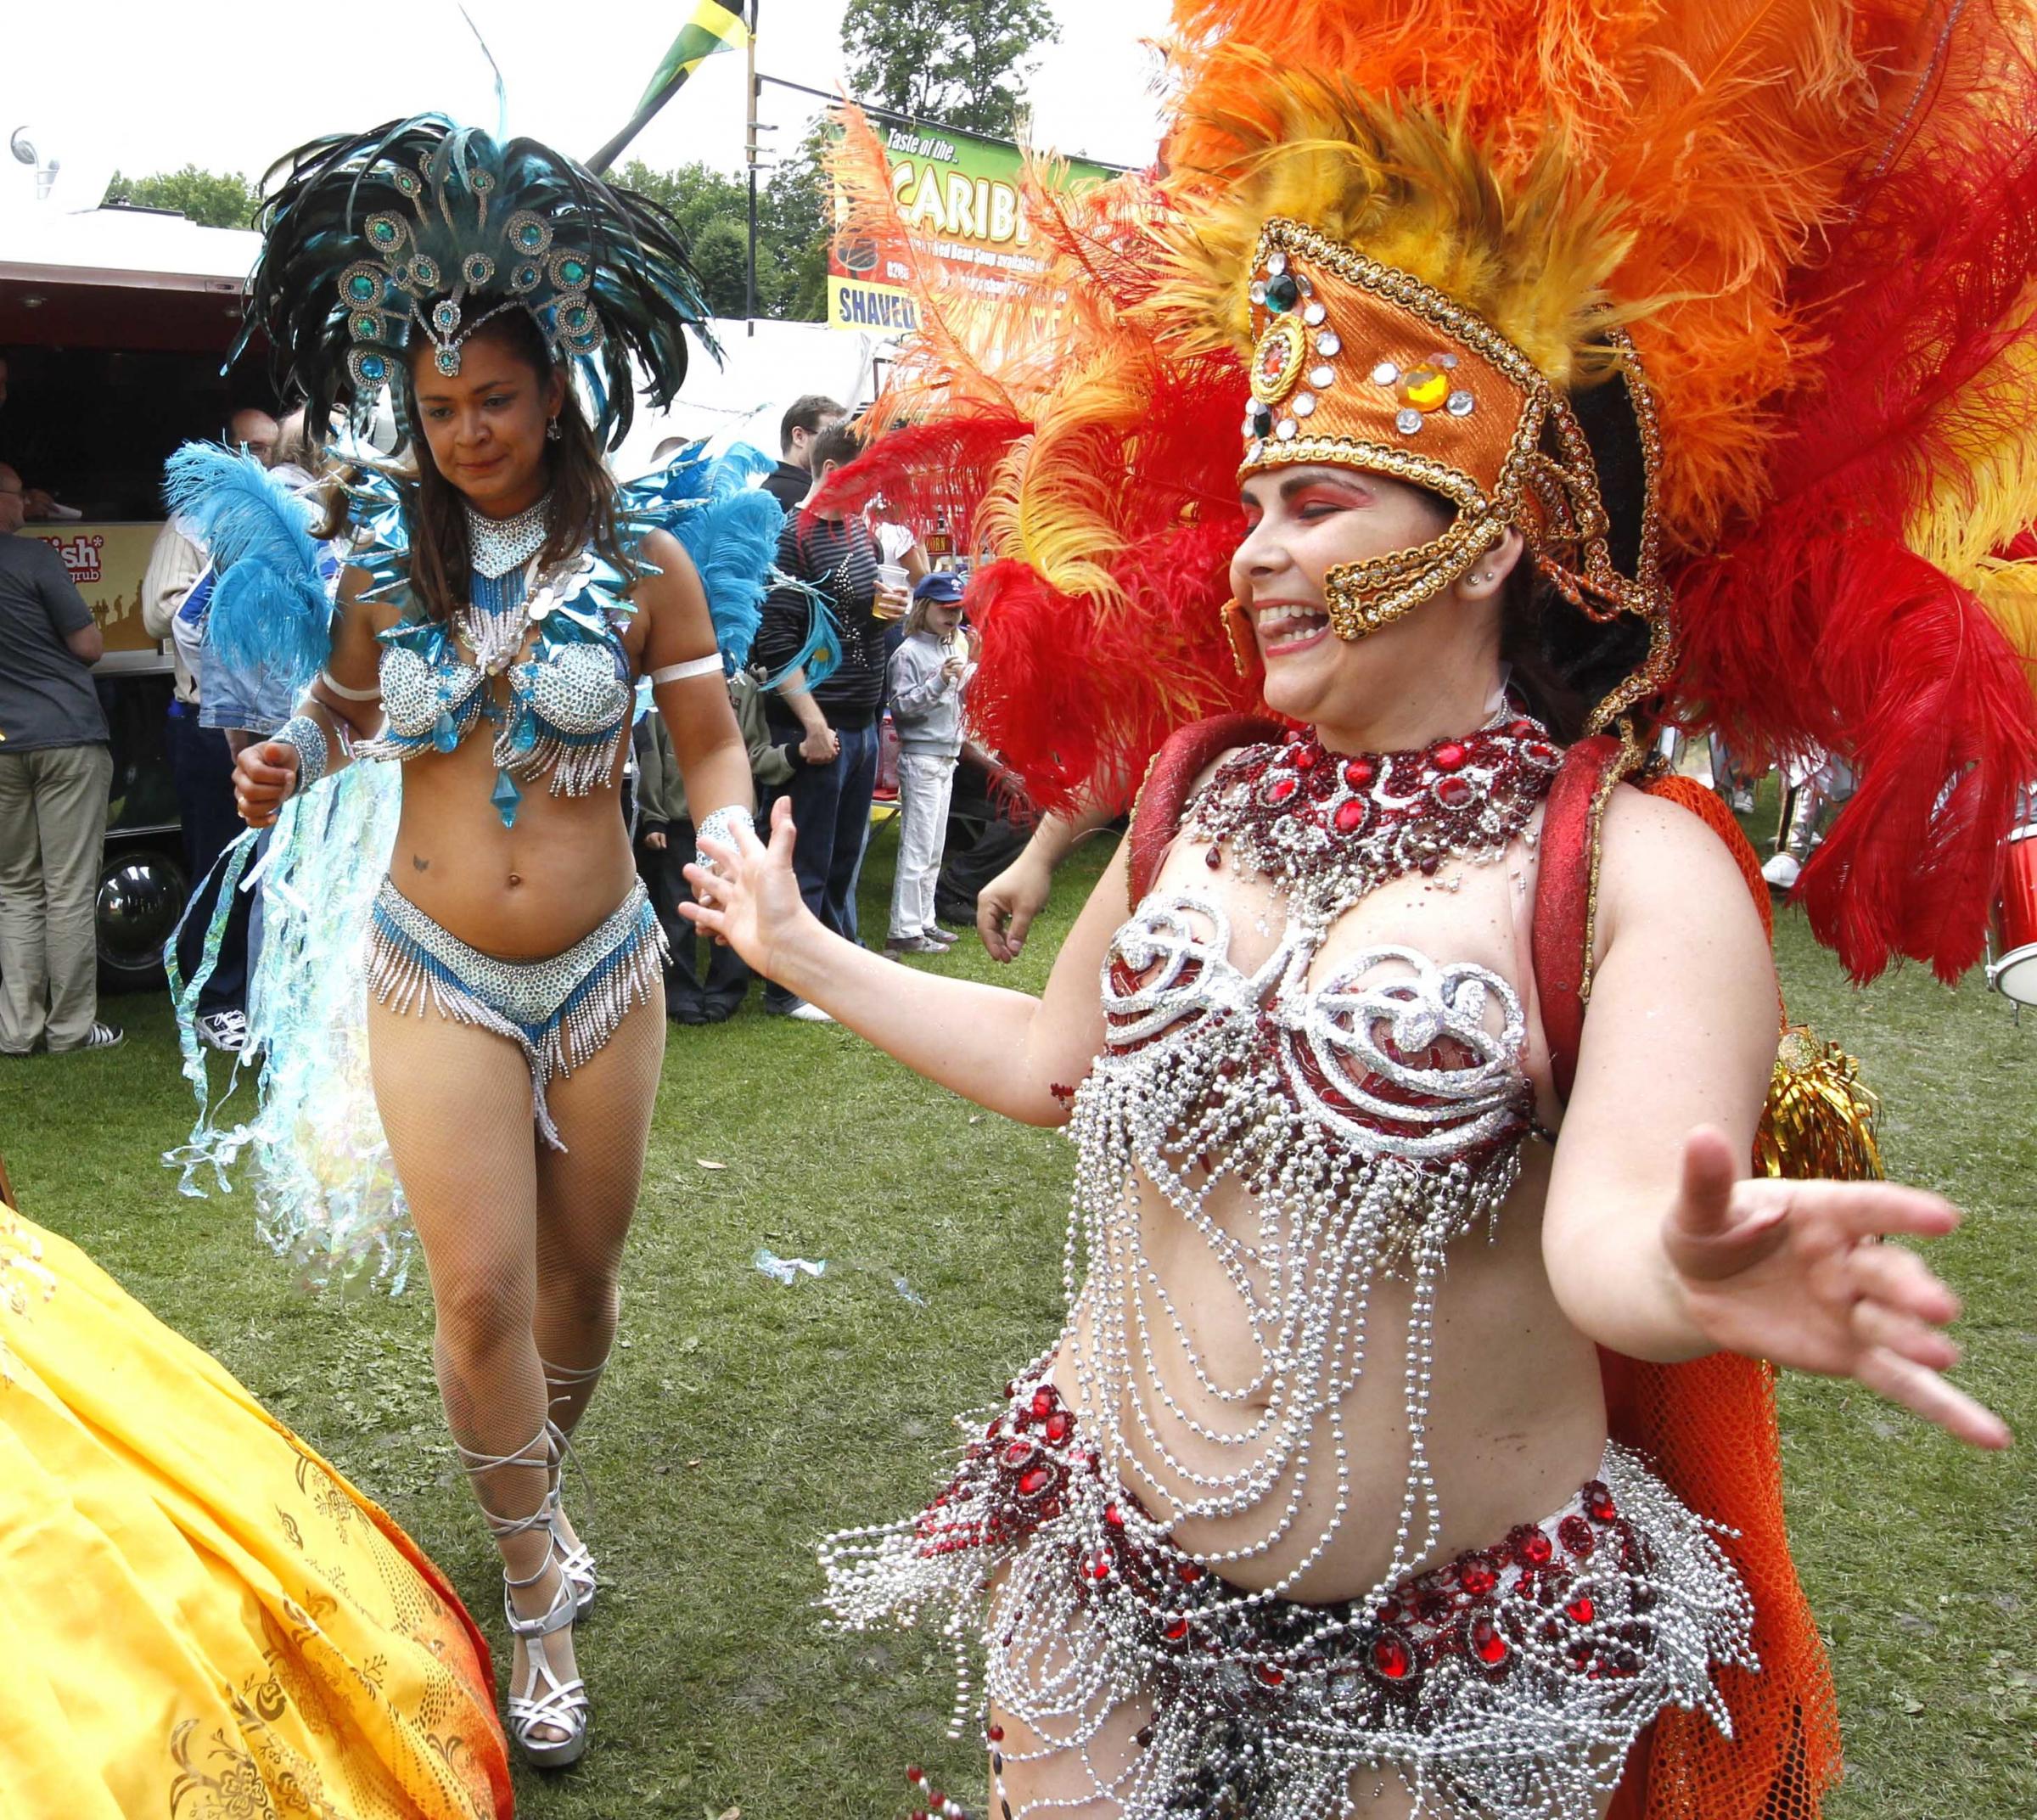 Dance of a lifetime - a samba group perform in Castle Park